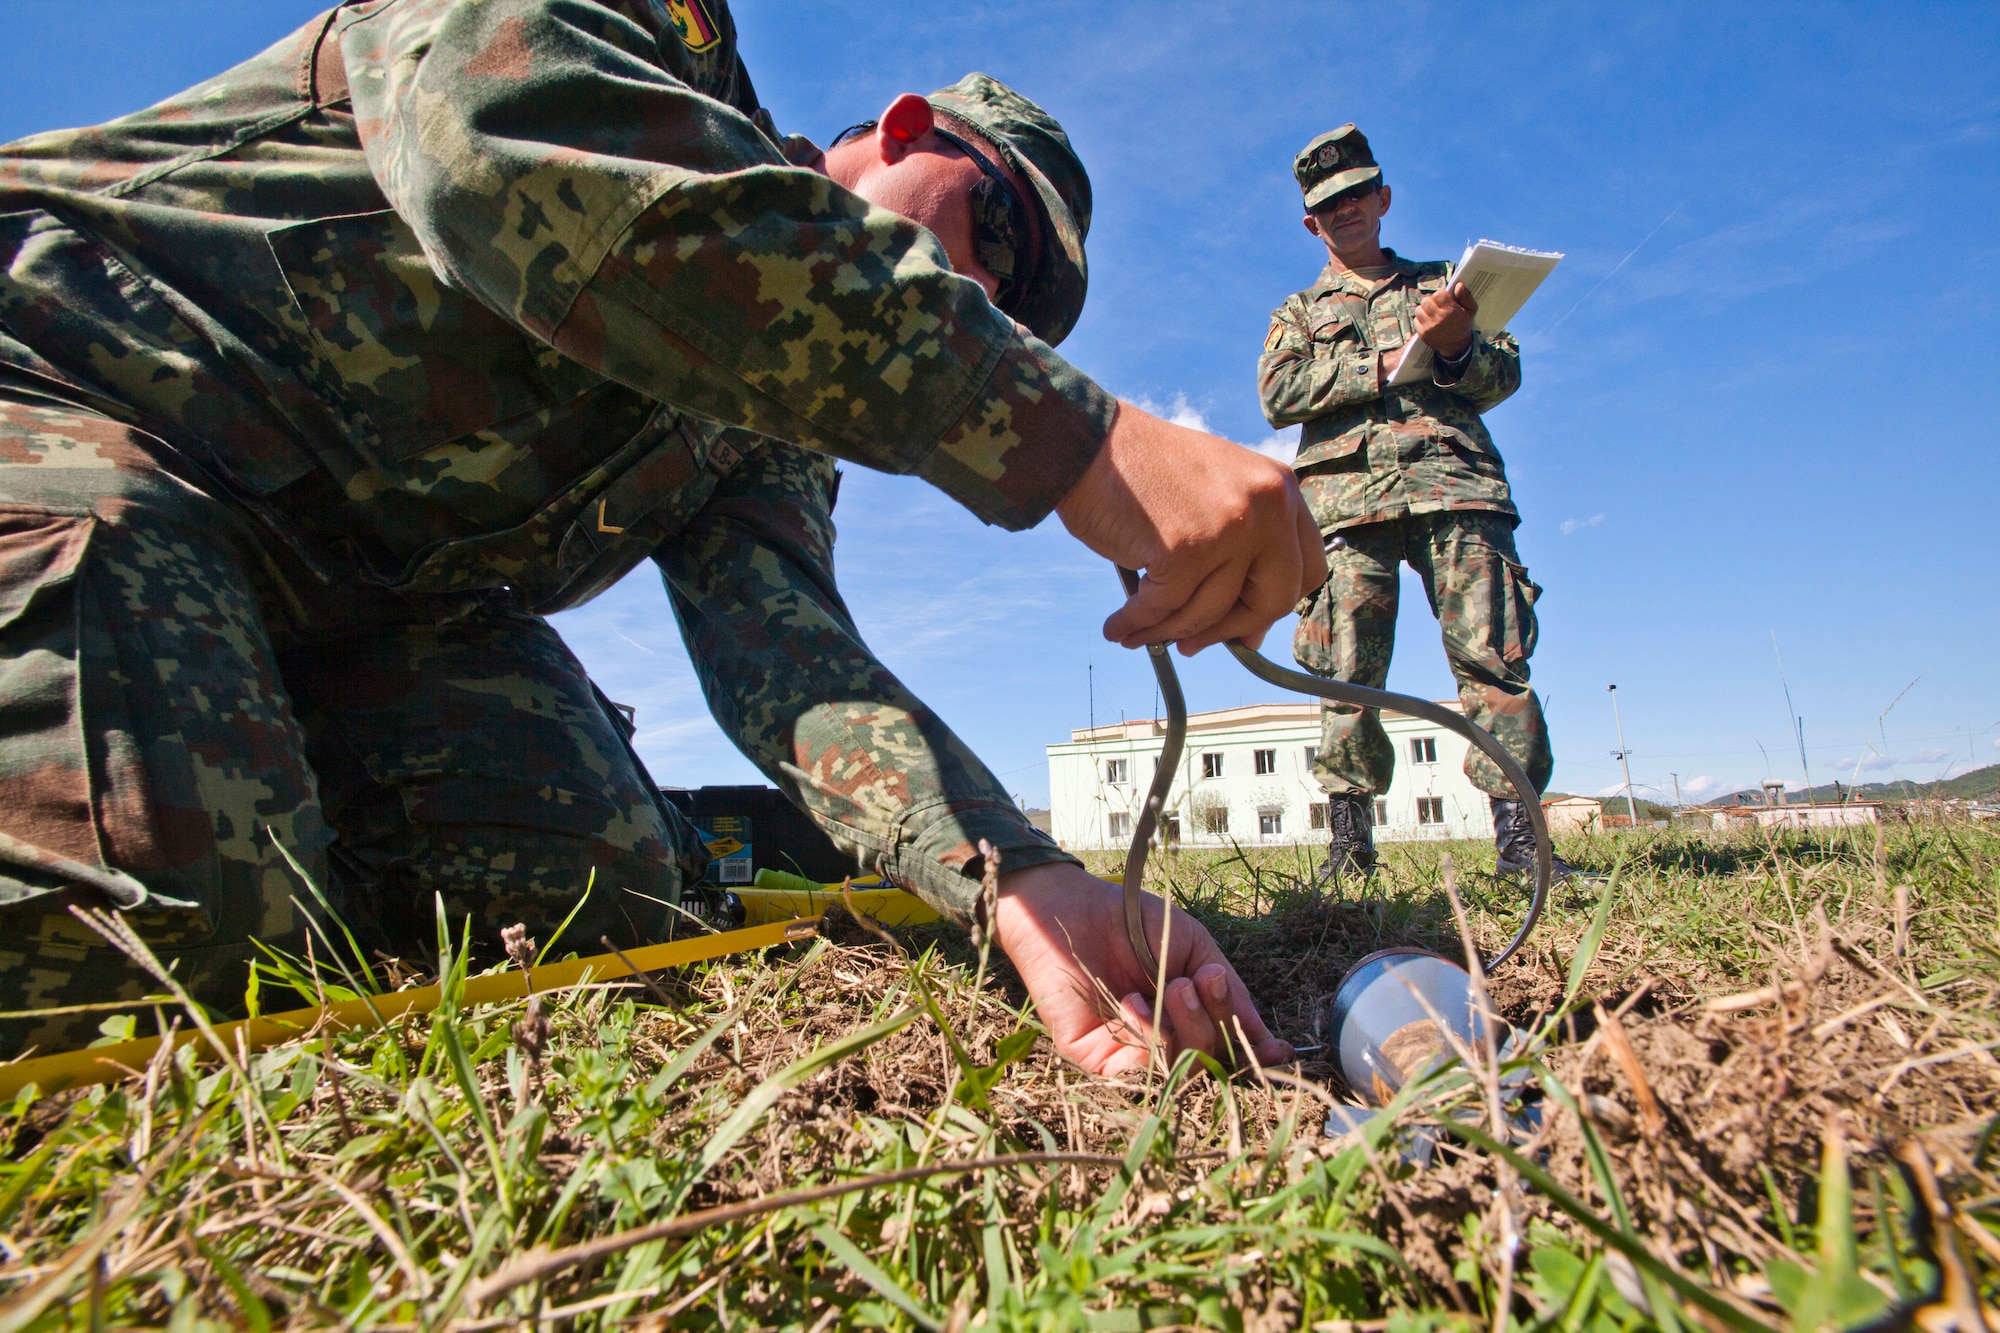 A picture of Albanian Army Cpl. Hajredin Istrefi observing Lance Cpl. Dorjan Isufi, measure an unexploded munition.